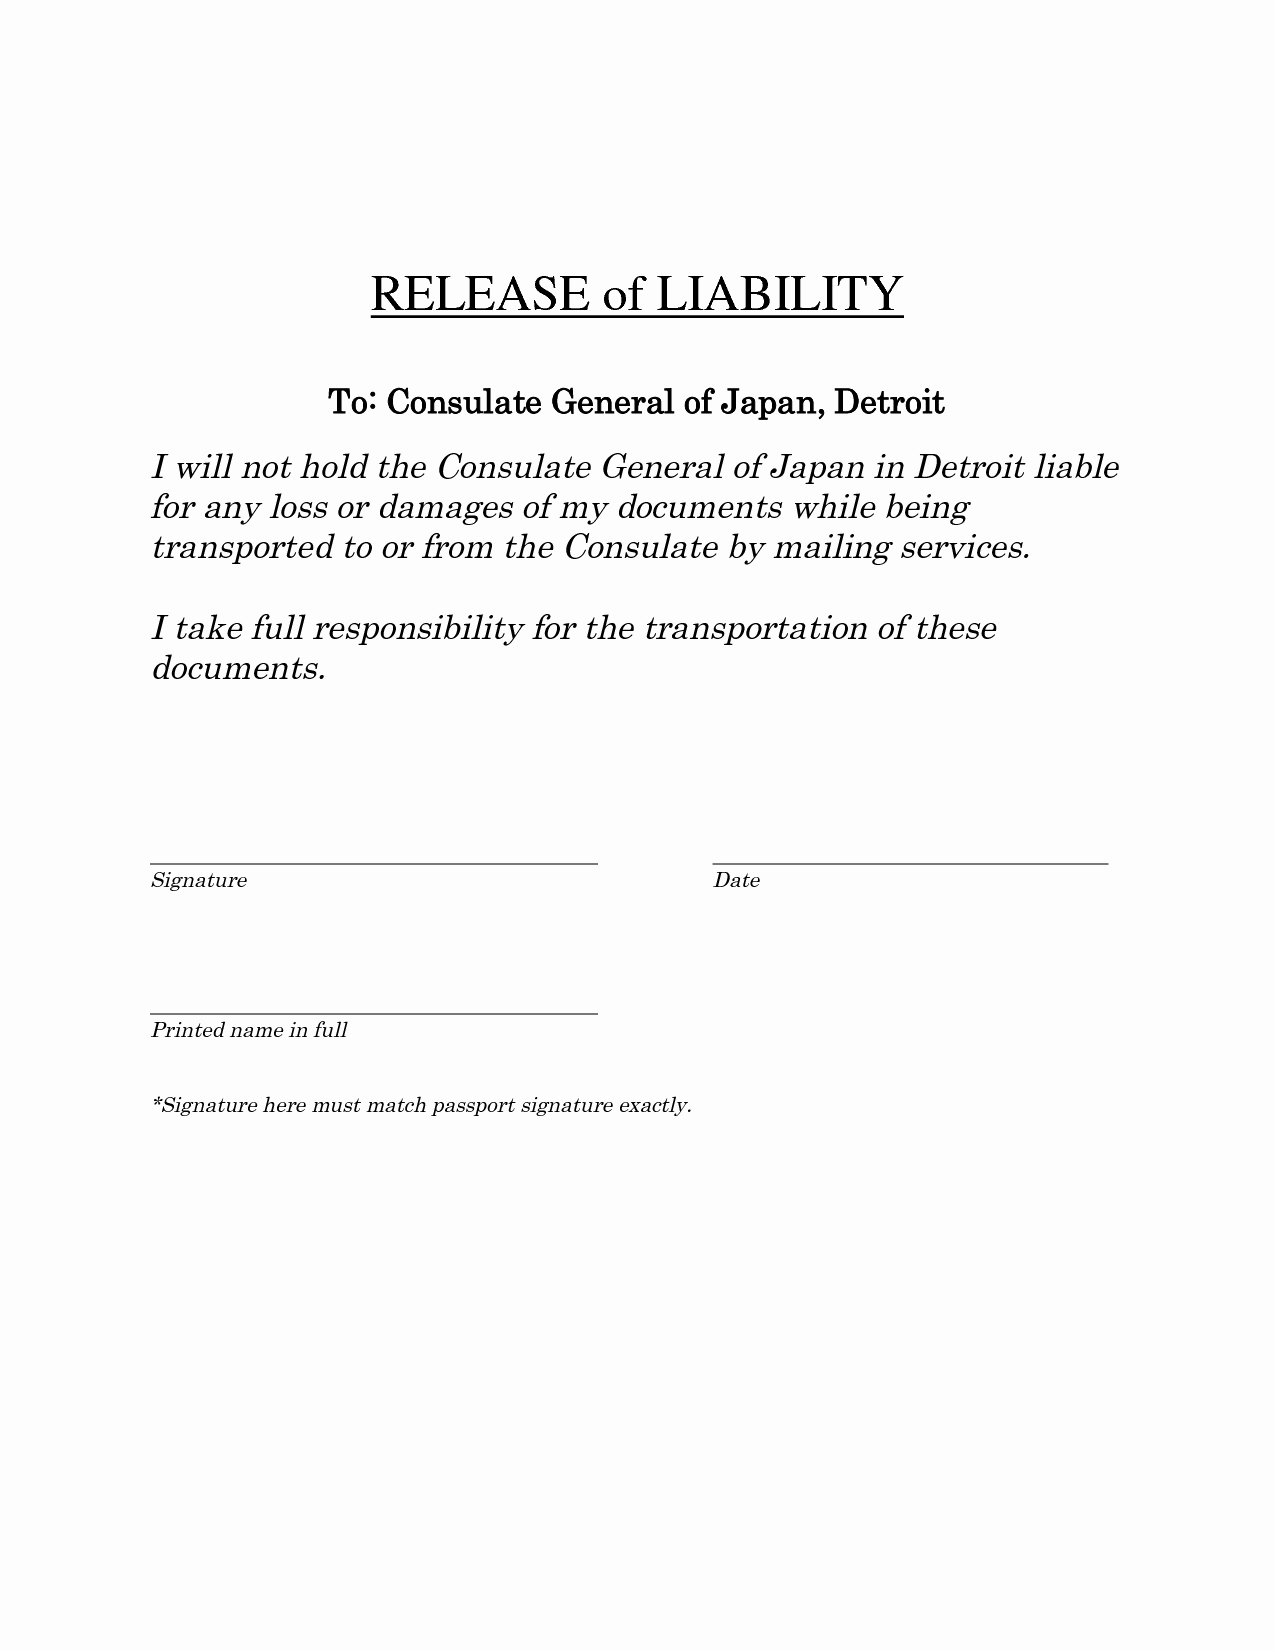 Generic Liability Waiver and Release form